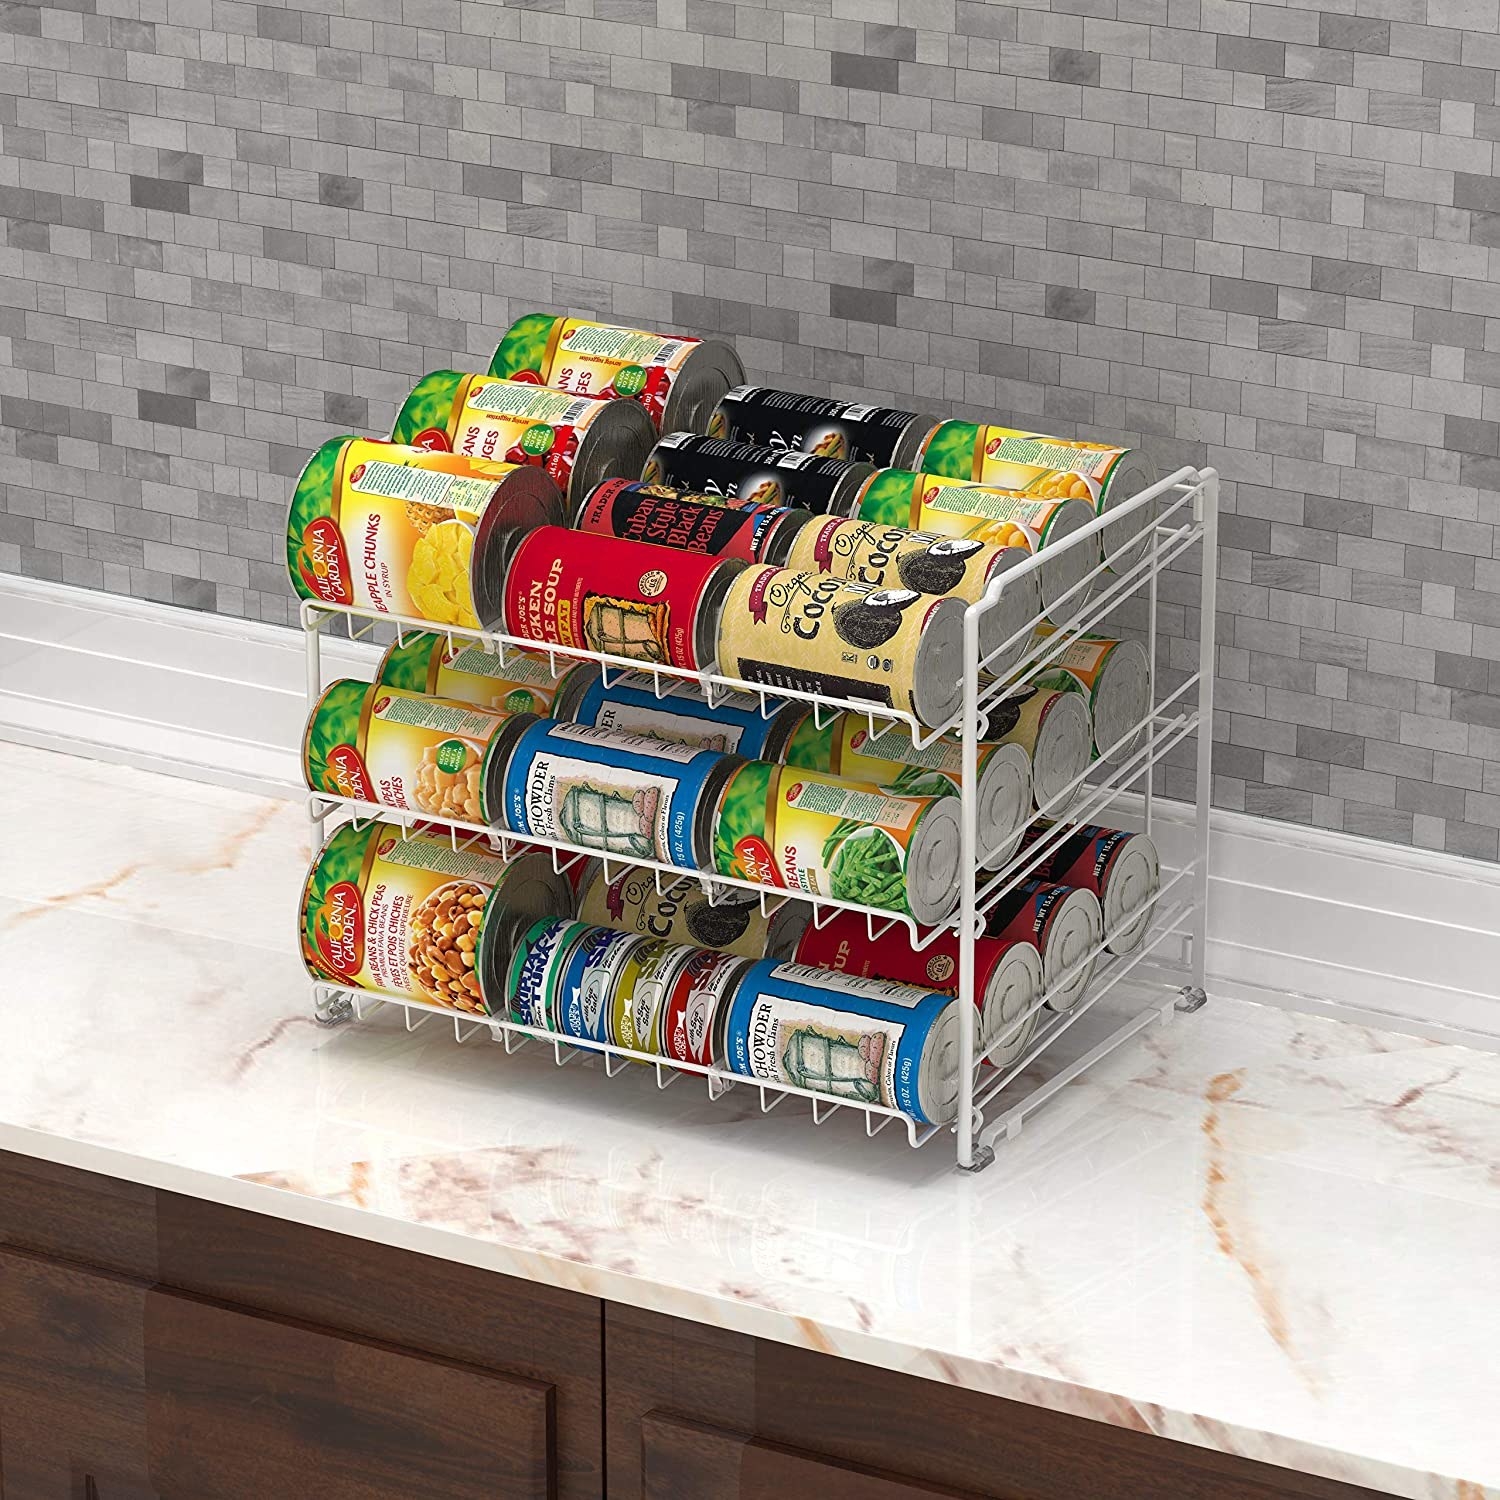 A three-tiered can rack on a kitchen counter, laden with canned goods